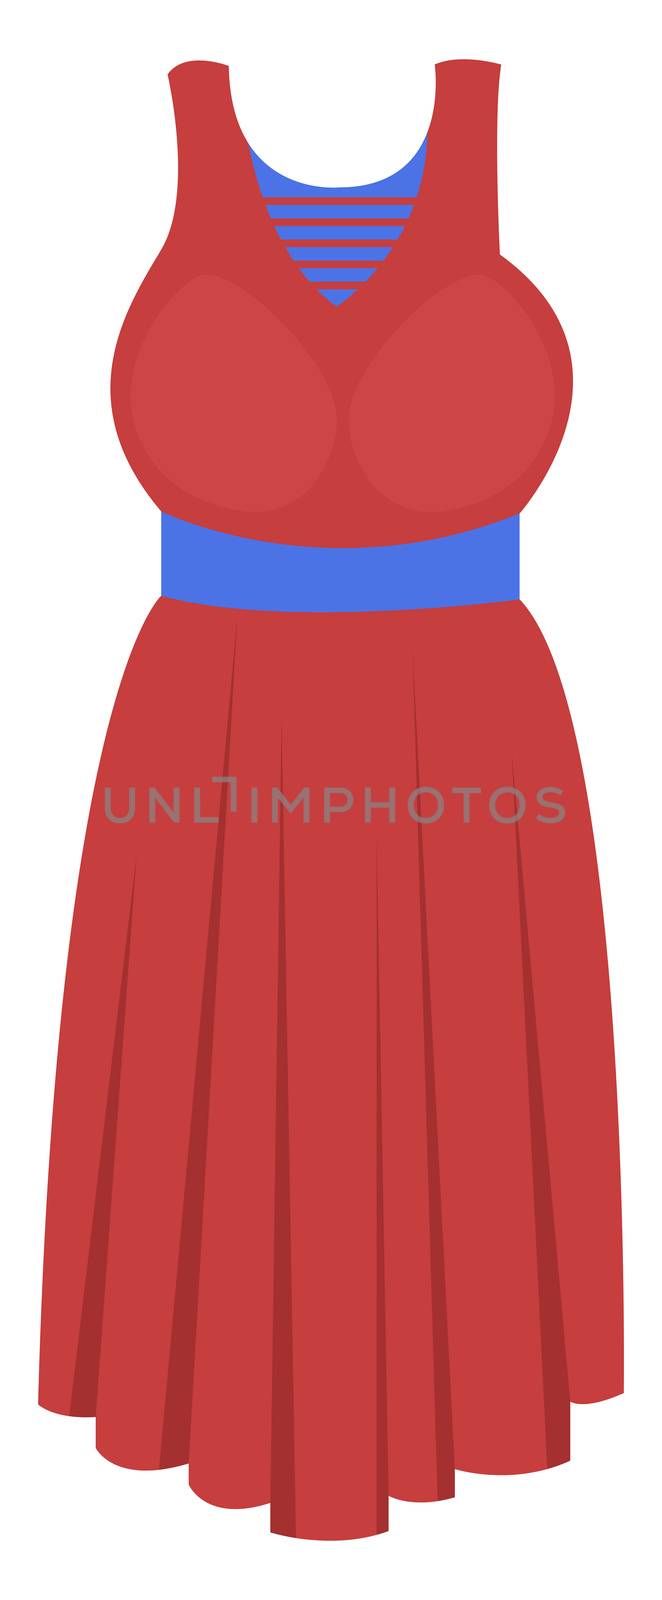 Red woman dress, illustration, vector on white background by Morphart